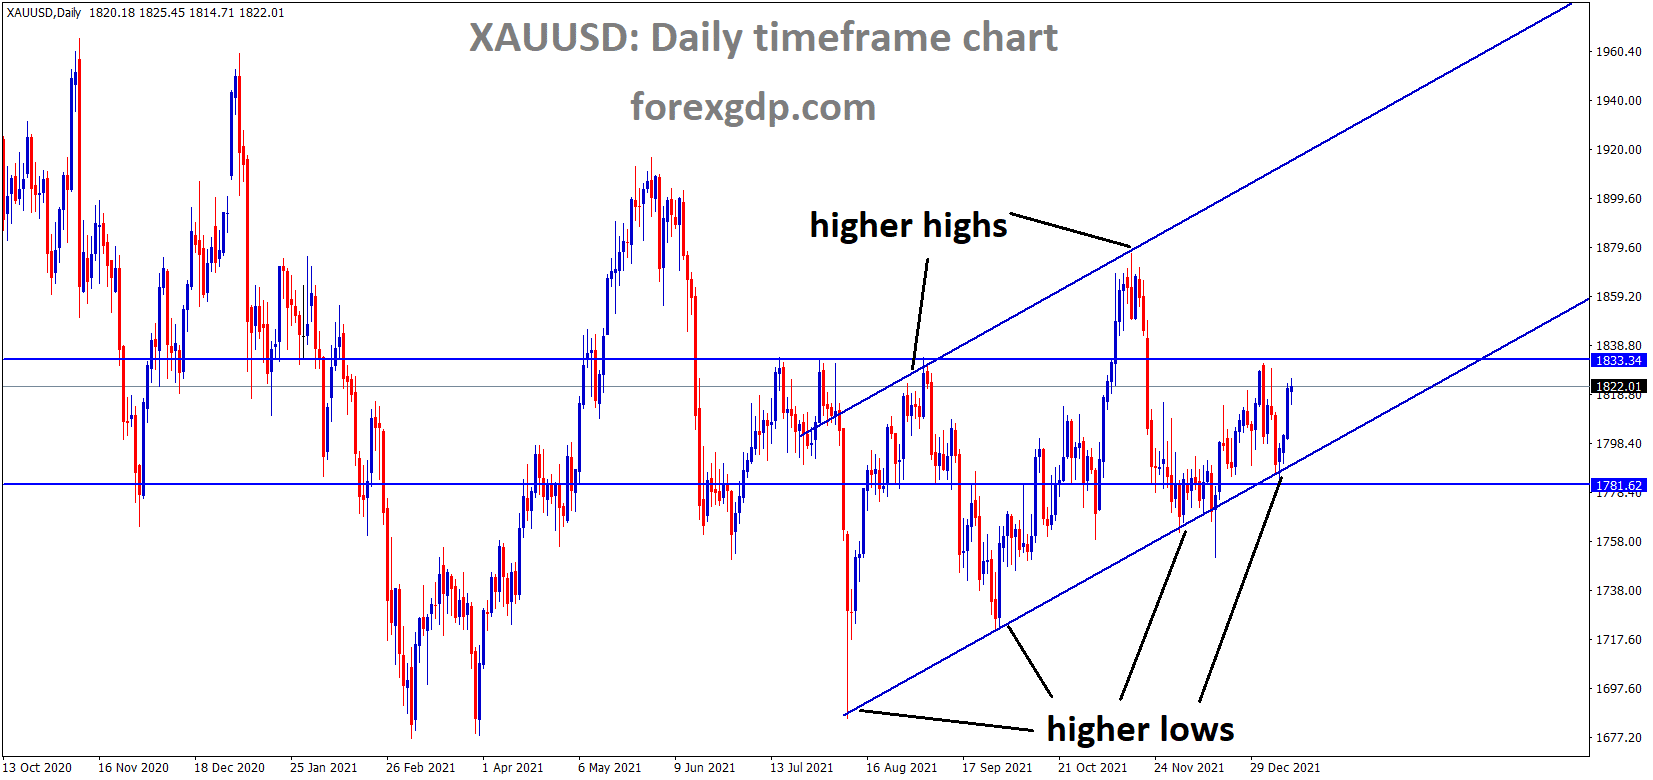 XAUUSD Gold price is moving in an Ascending channel and the market has rebounded from the higher low area of the channel 1